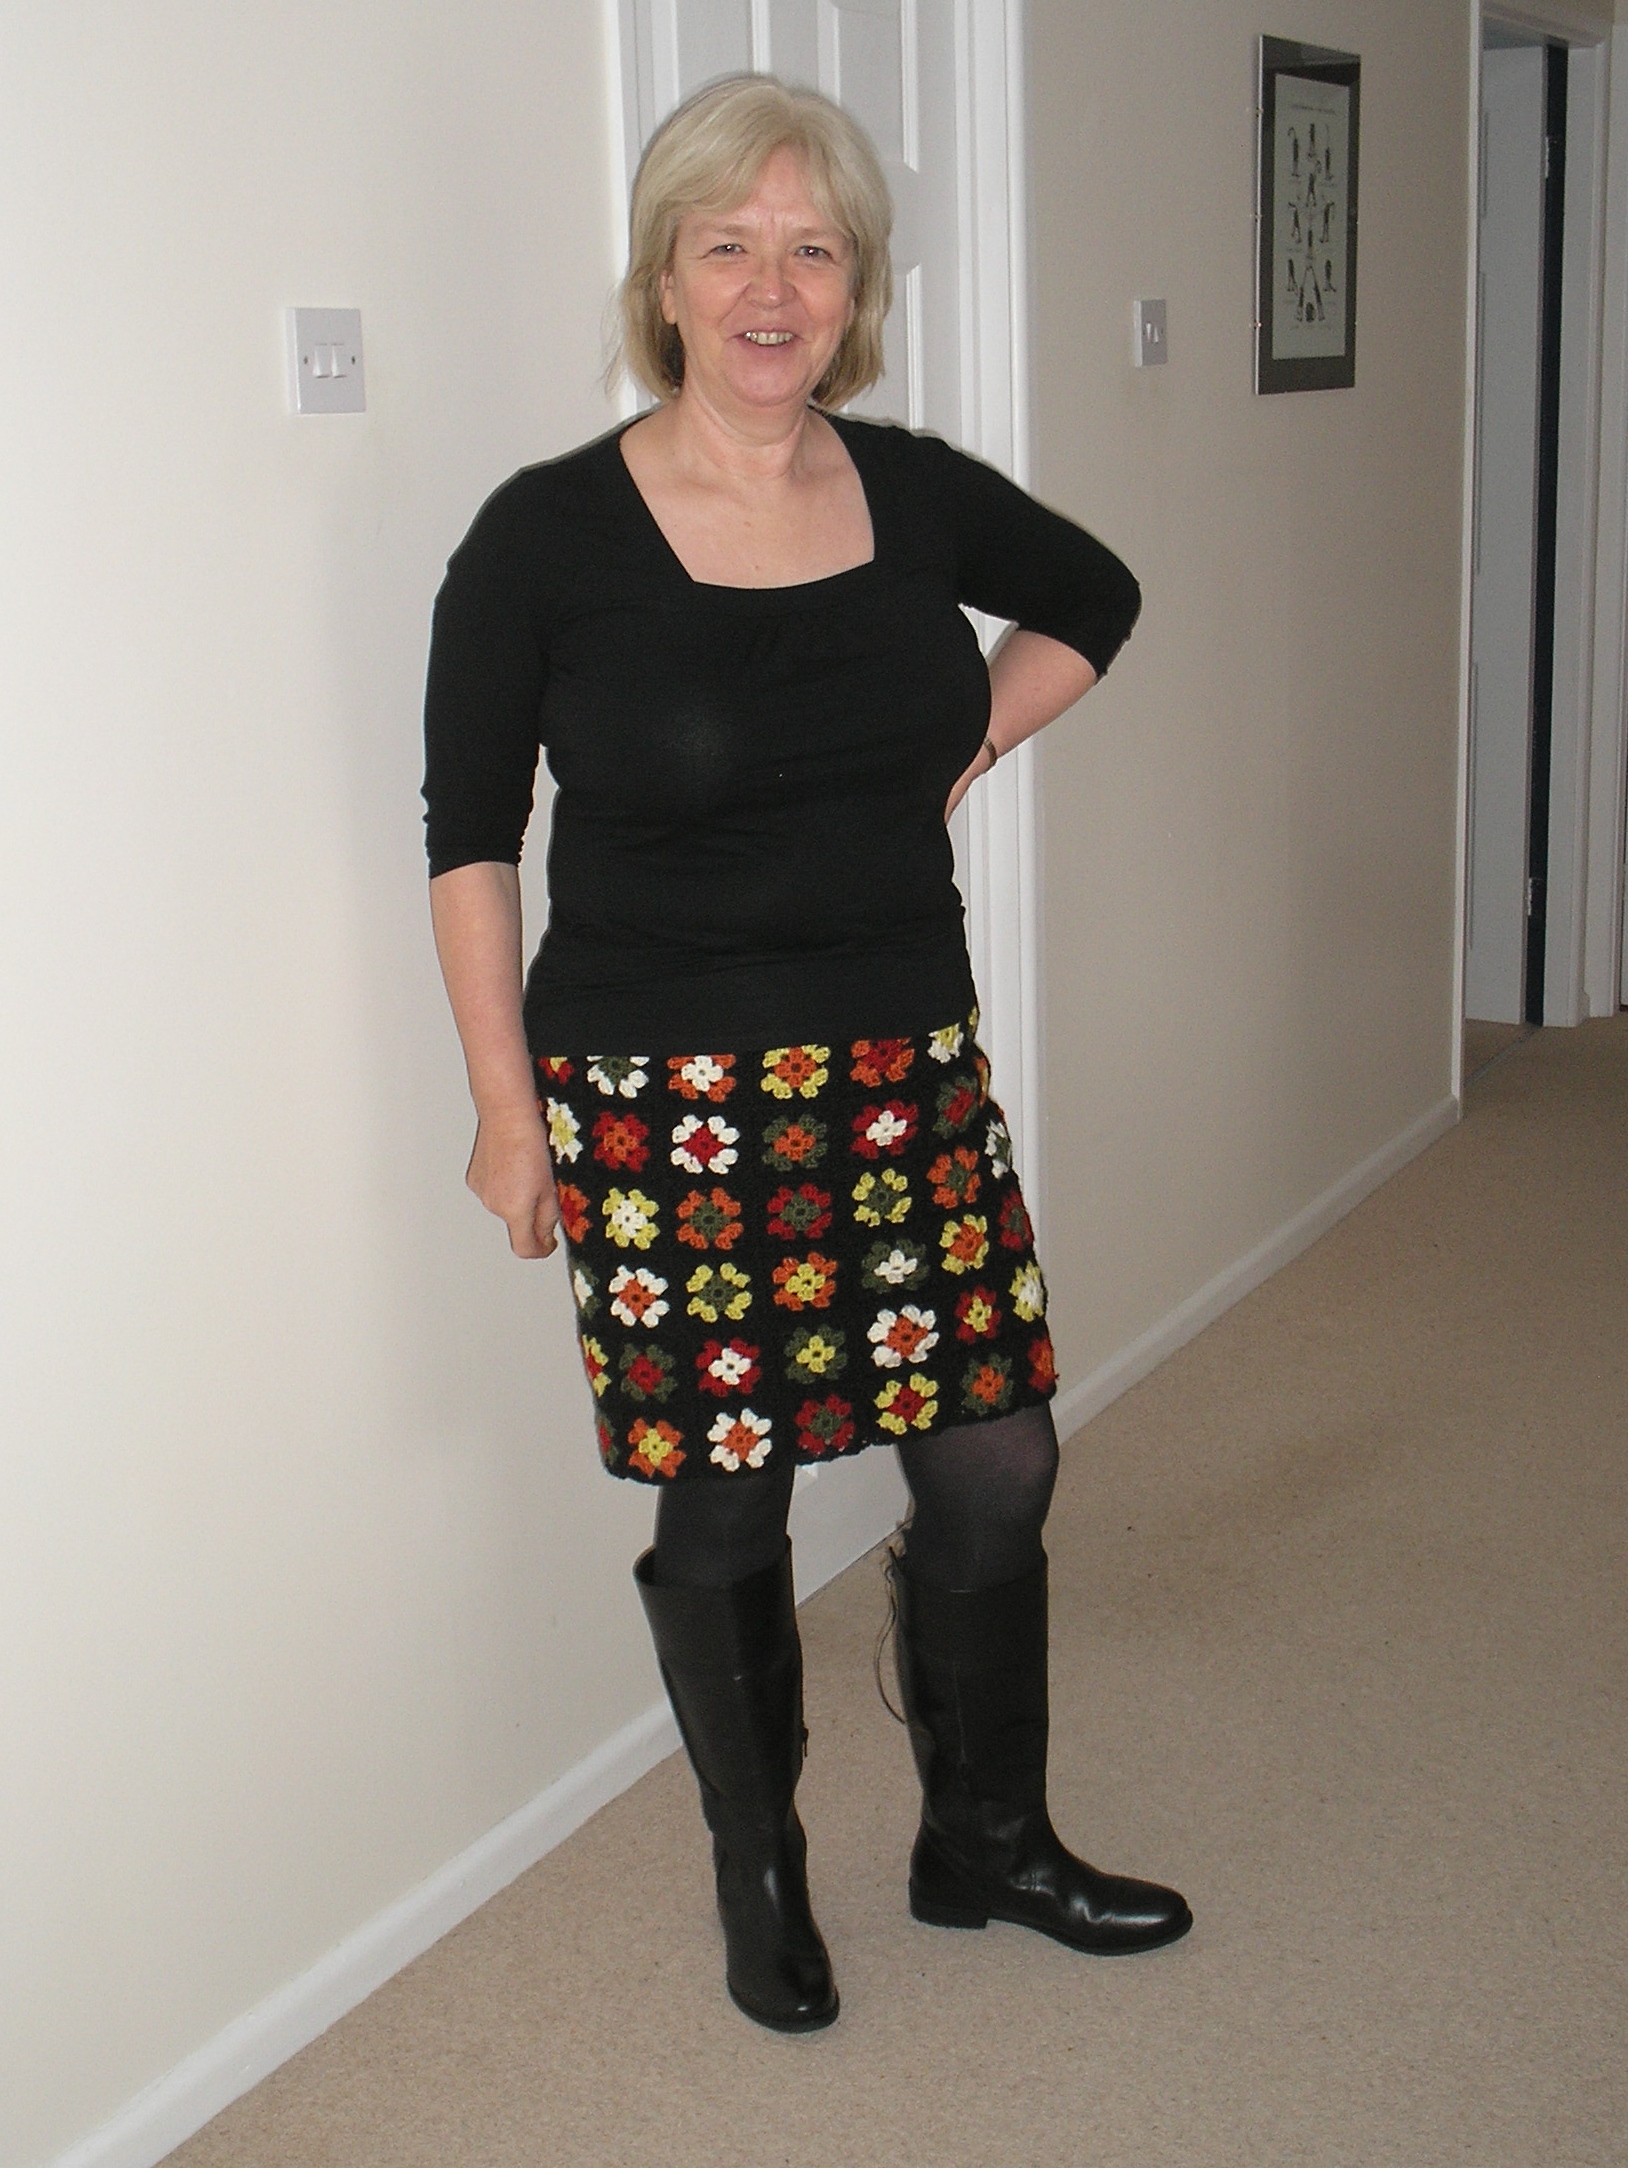 Blogiversary and a new skirt.